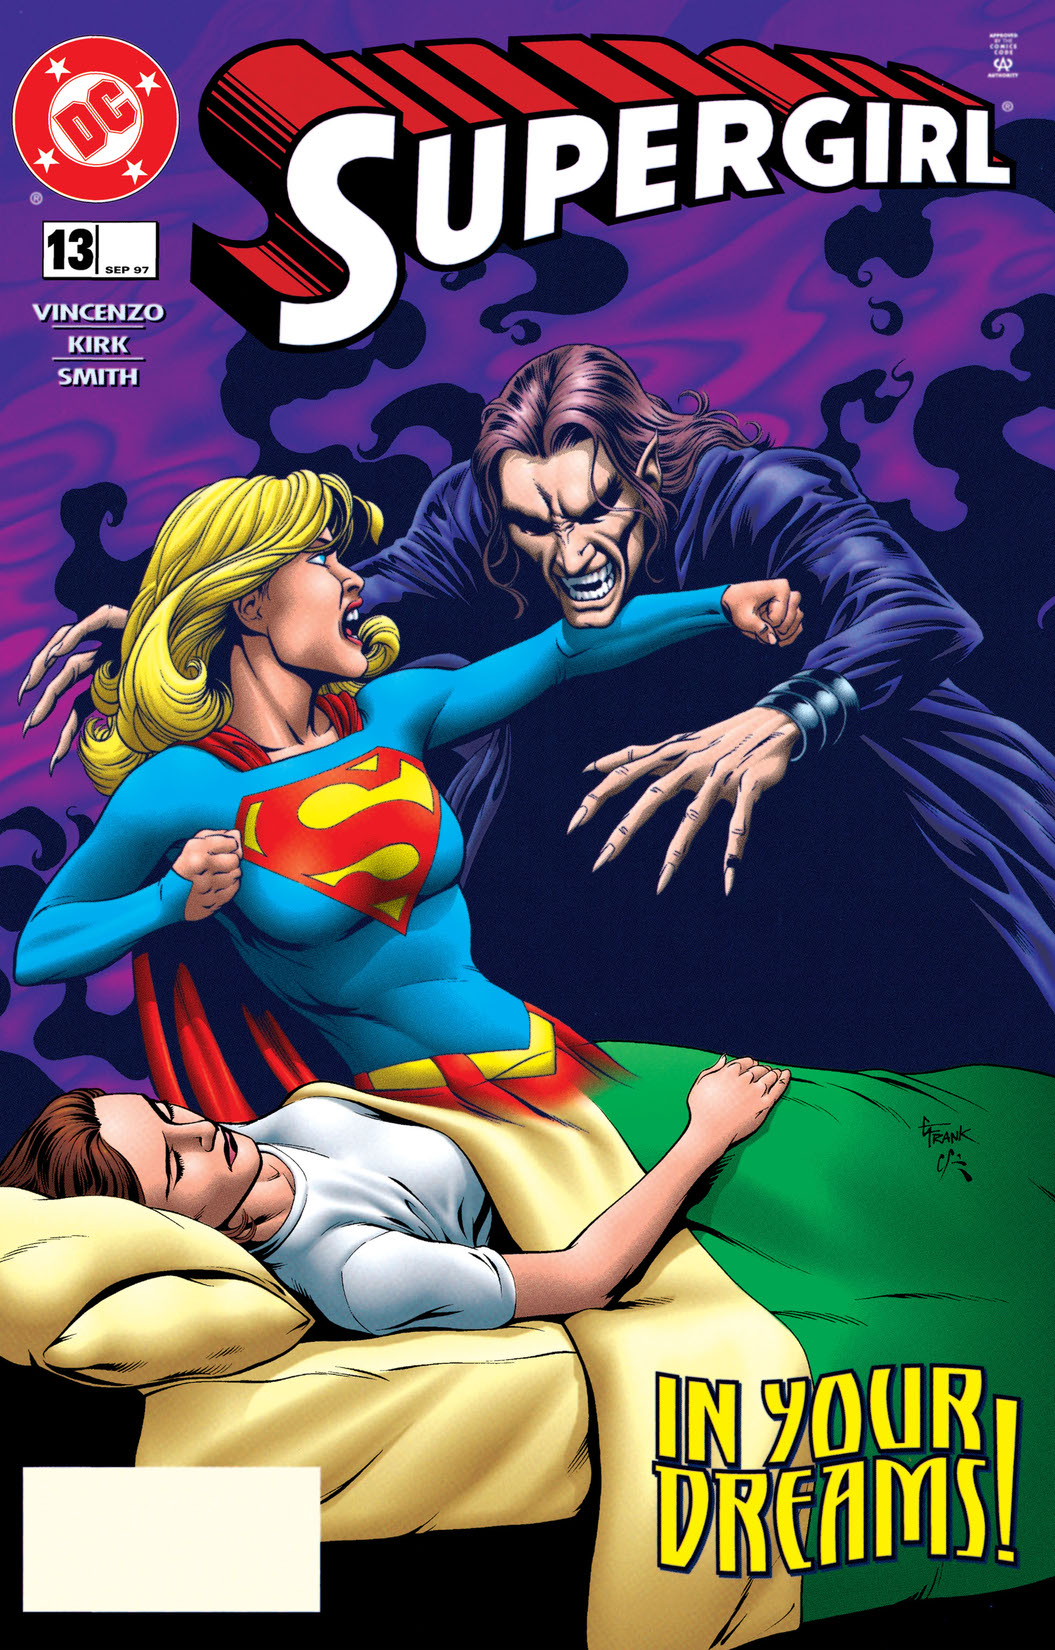 Supergirl (1996-) #13 preview images